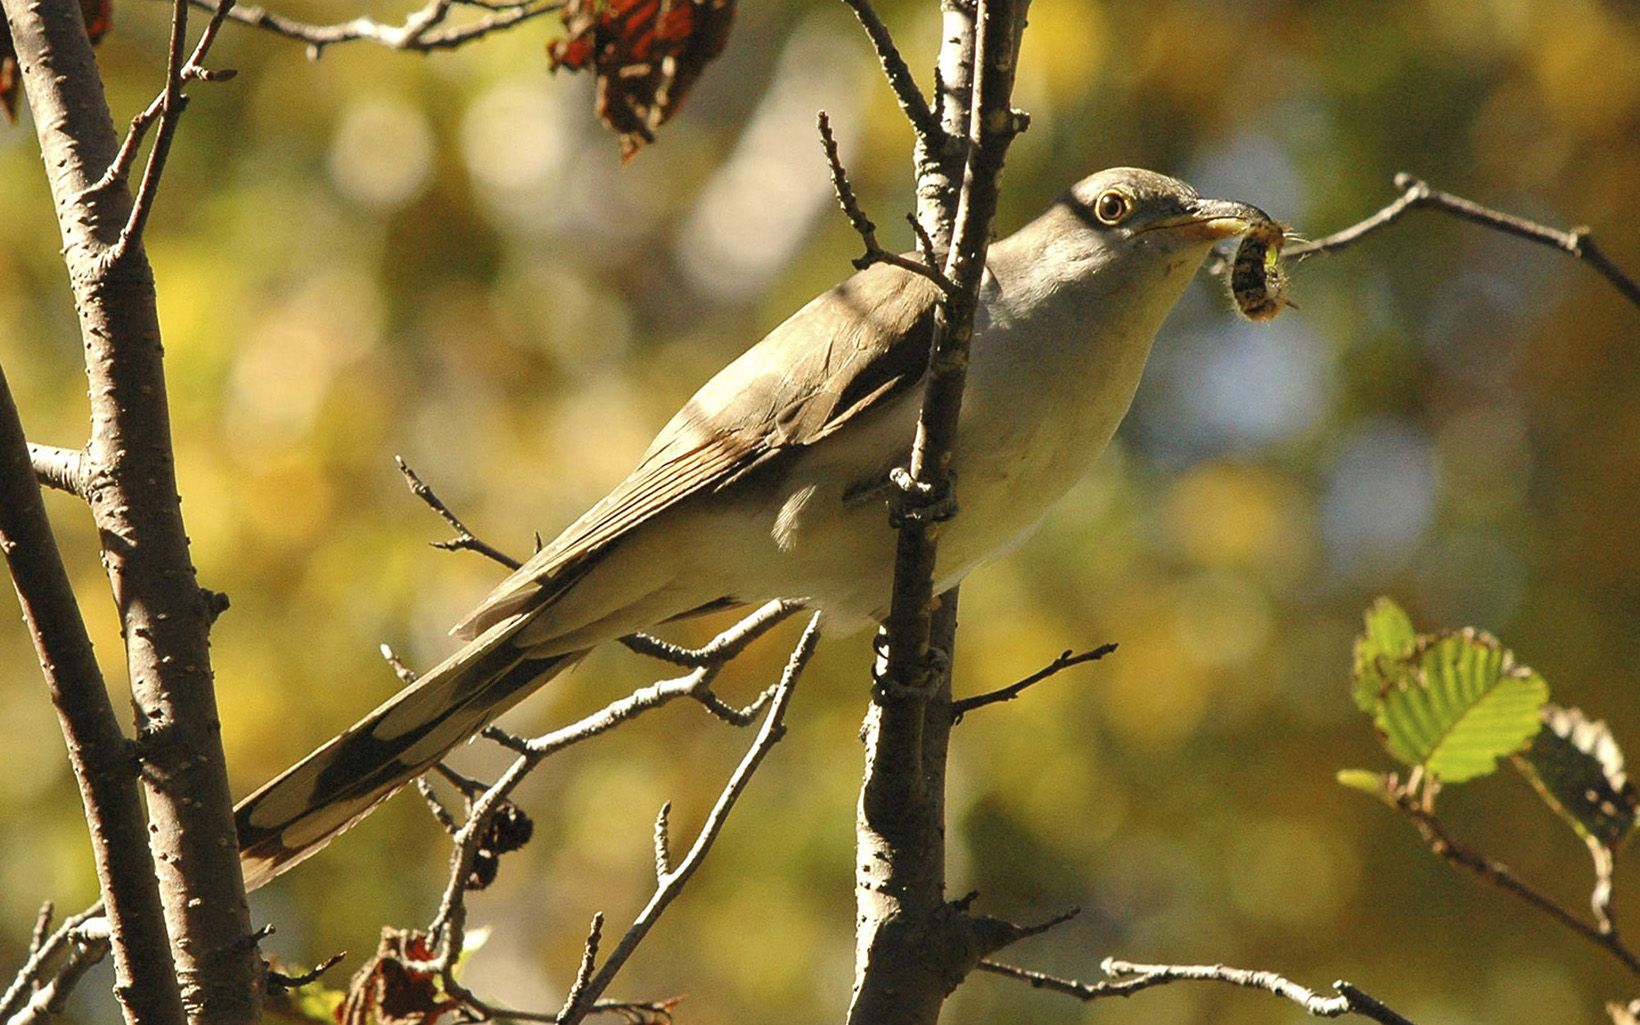 Good news for birds Annual Cliff-Gila Valley surveys showed large and stable populations of endangered southwestern willow flycatcher and threatened yellow-billed cuckoo. © Jim Williams